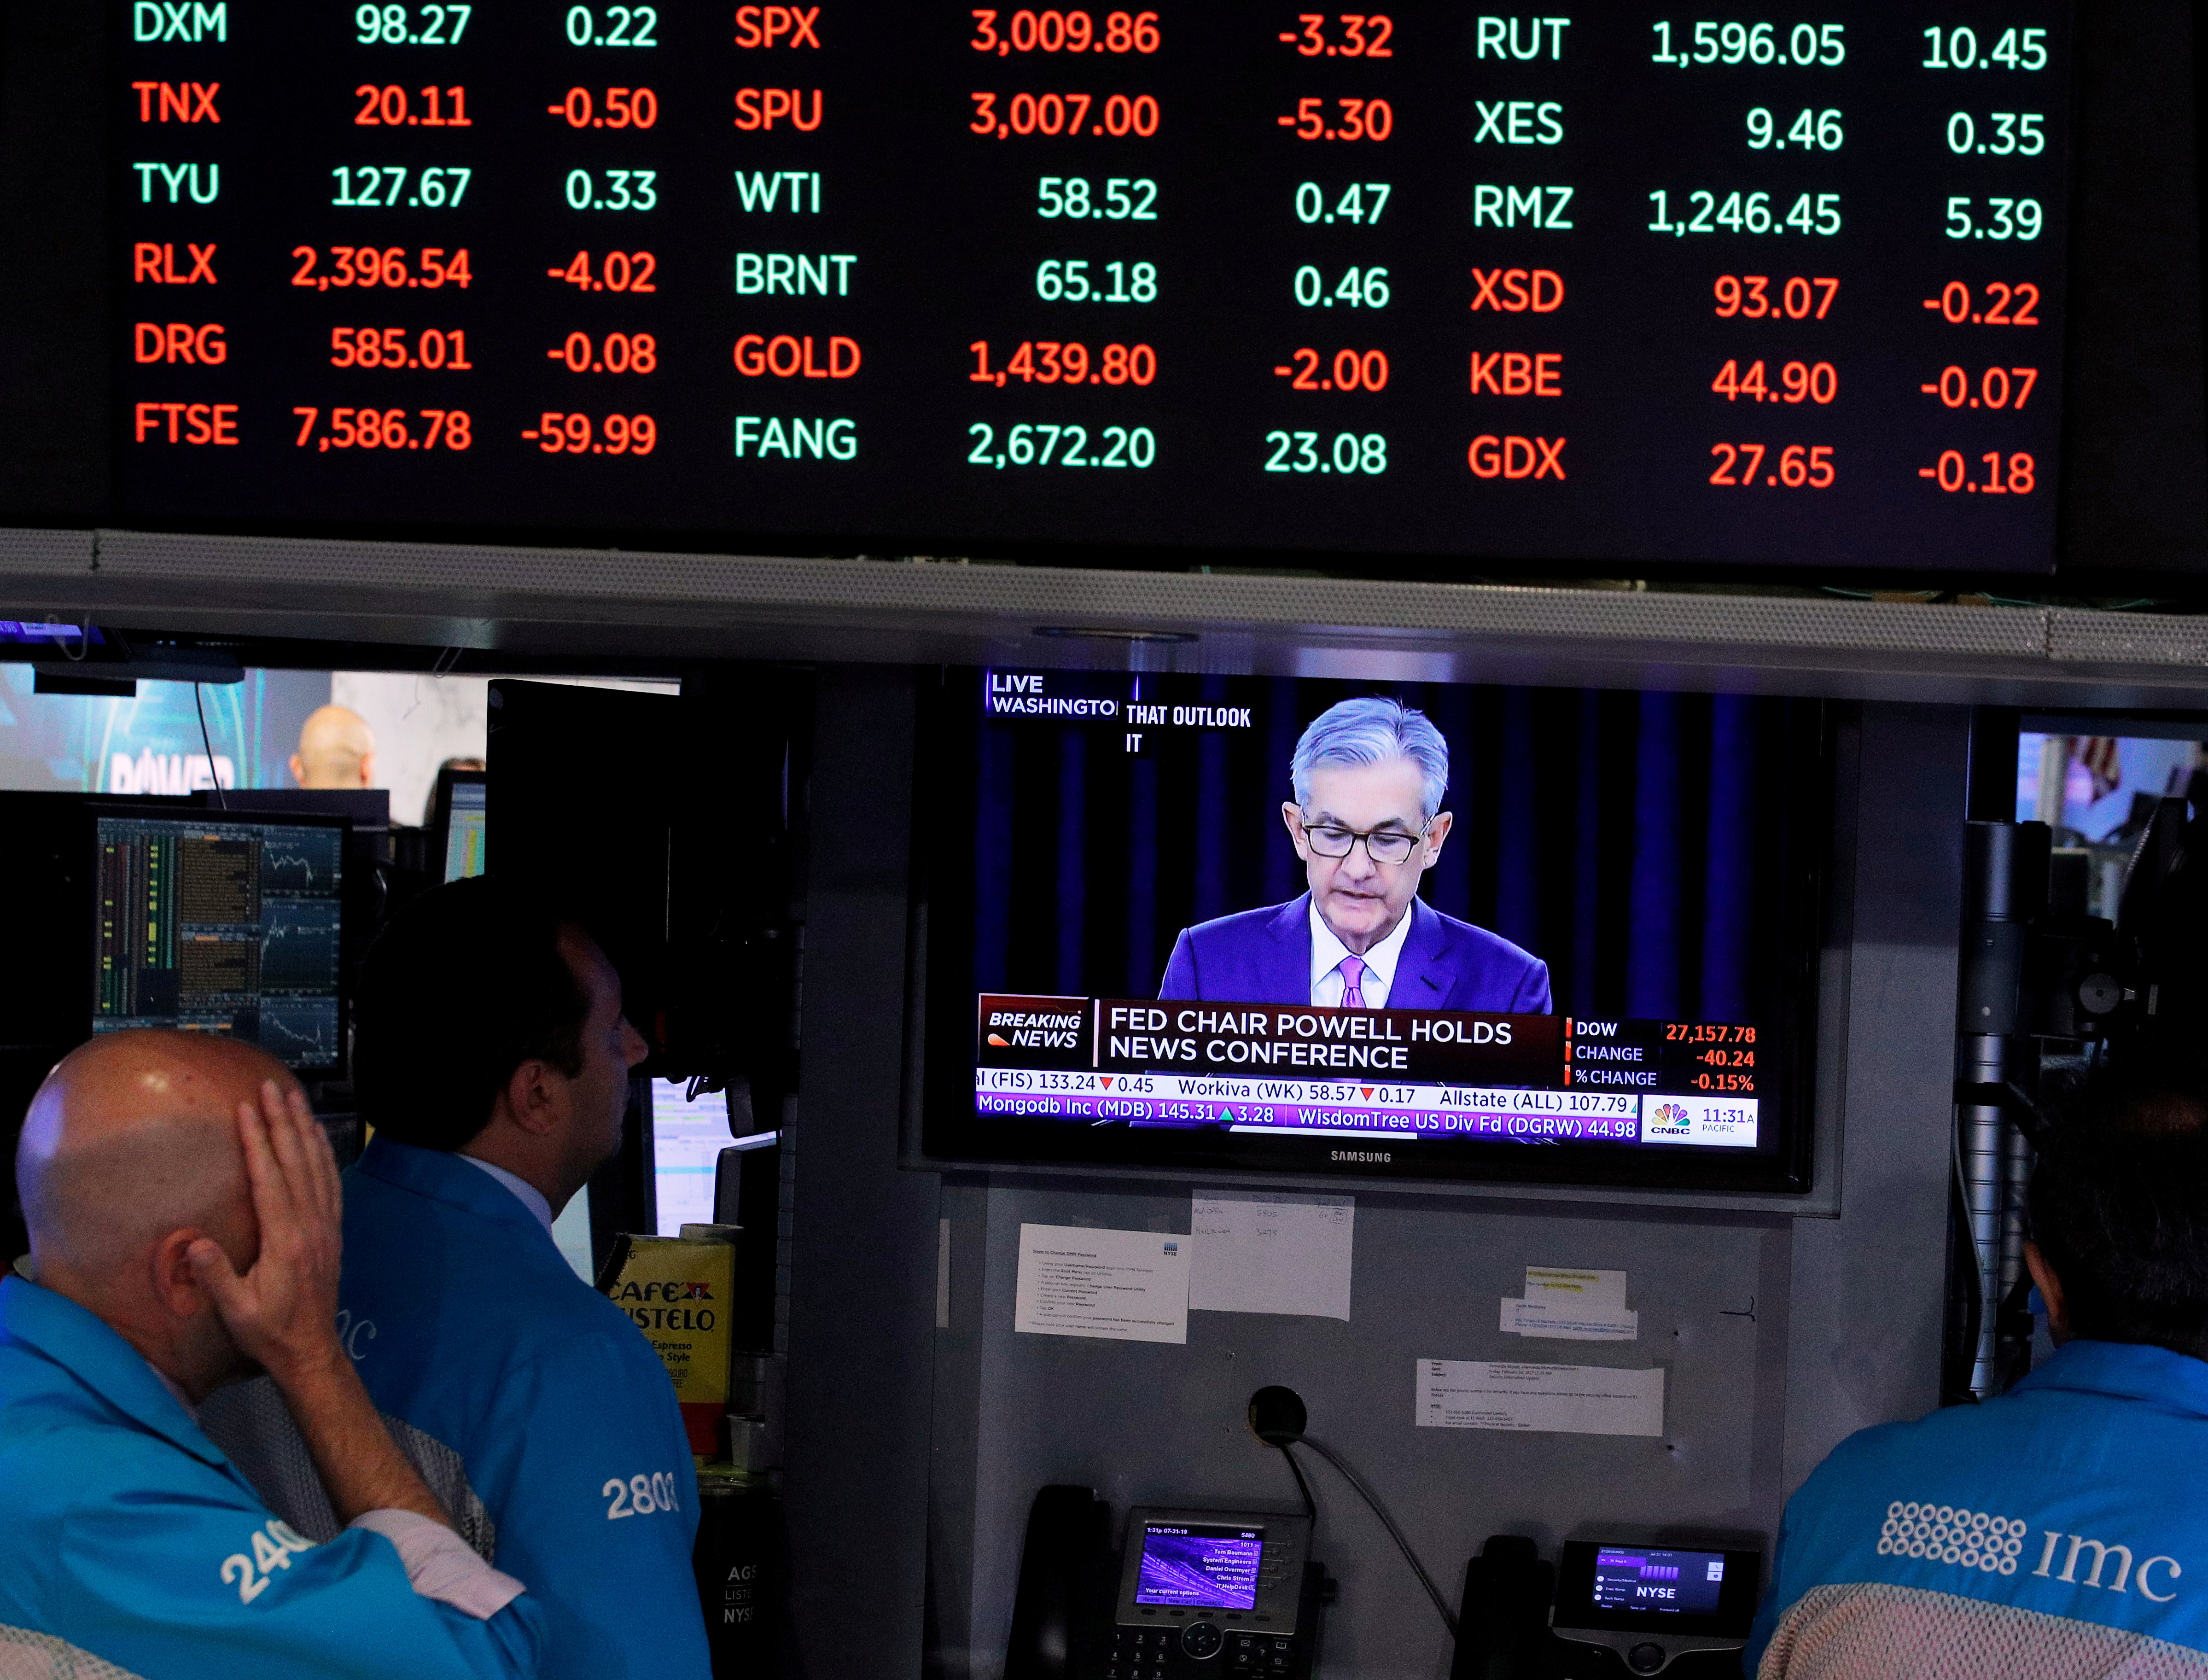 raders look on as a screen shows Federal Reserve Chairman Jerome Powell